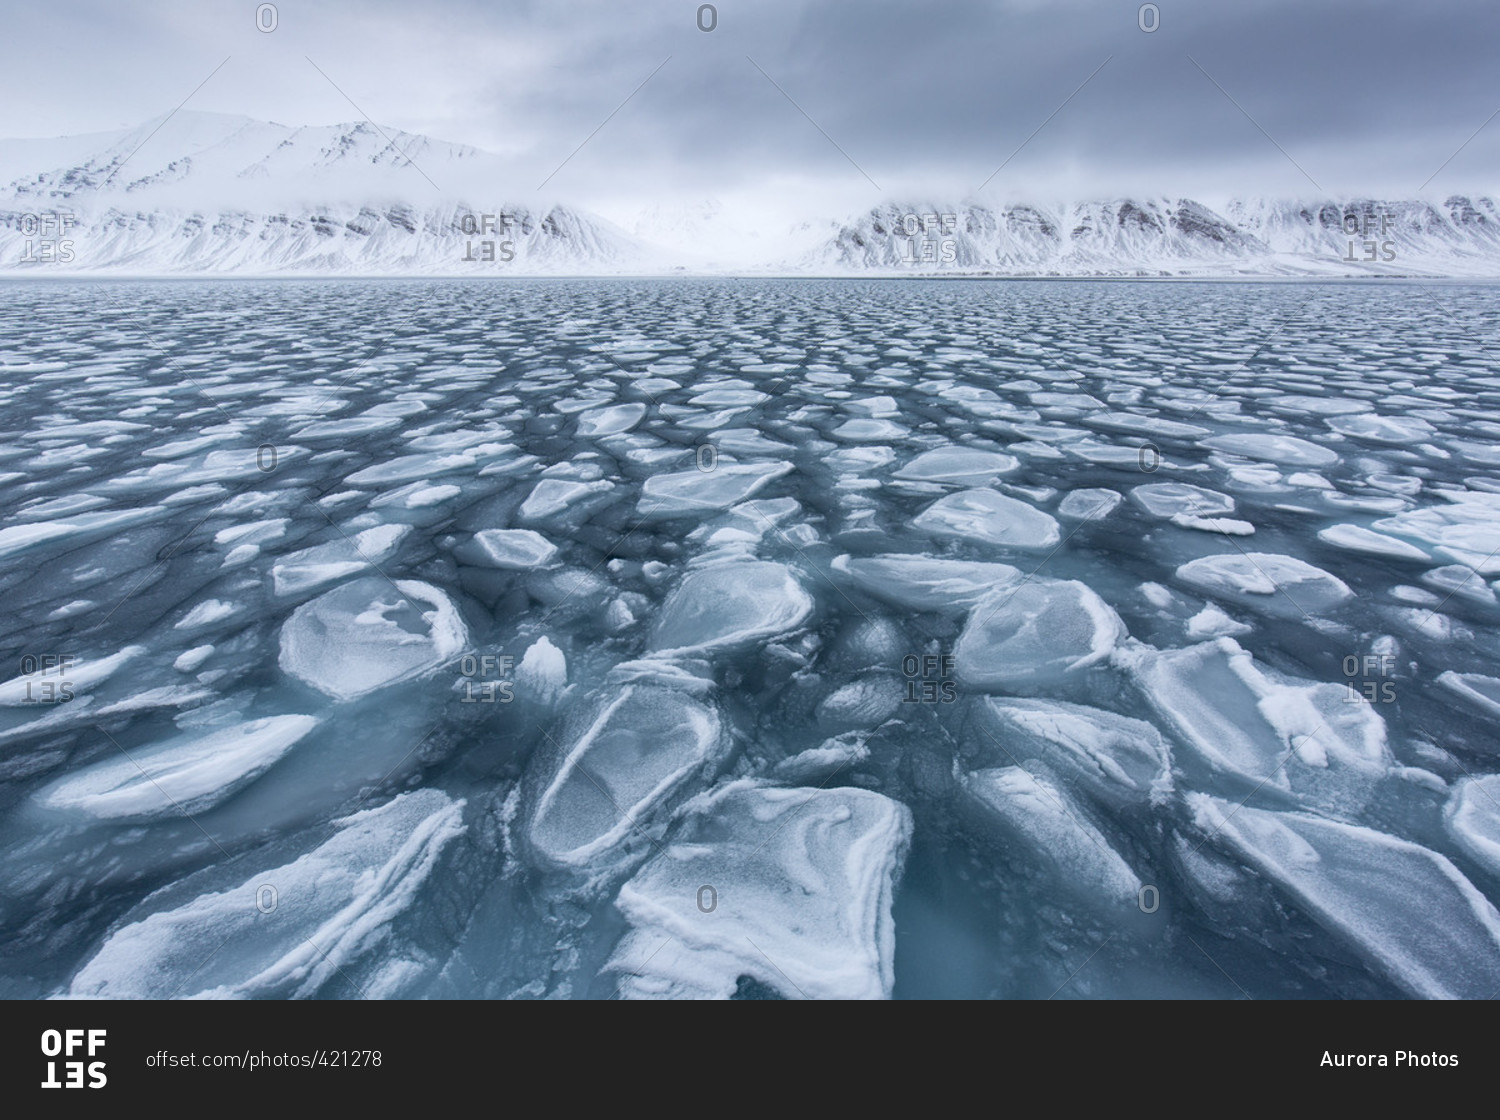 Broken Pack Ice In Arctic Sea With Glacier In The Background In Spitsbergen, Svalbard